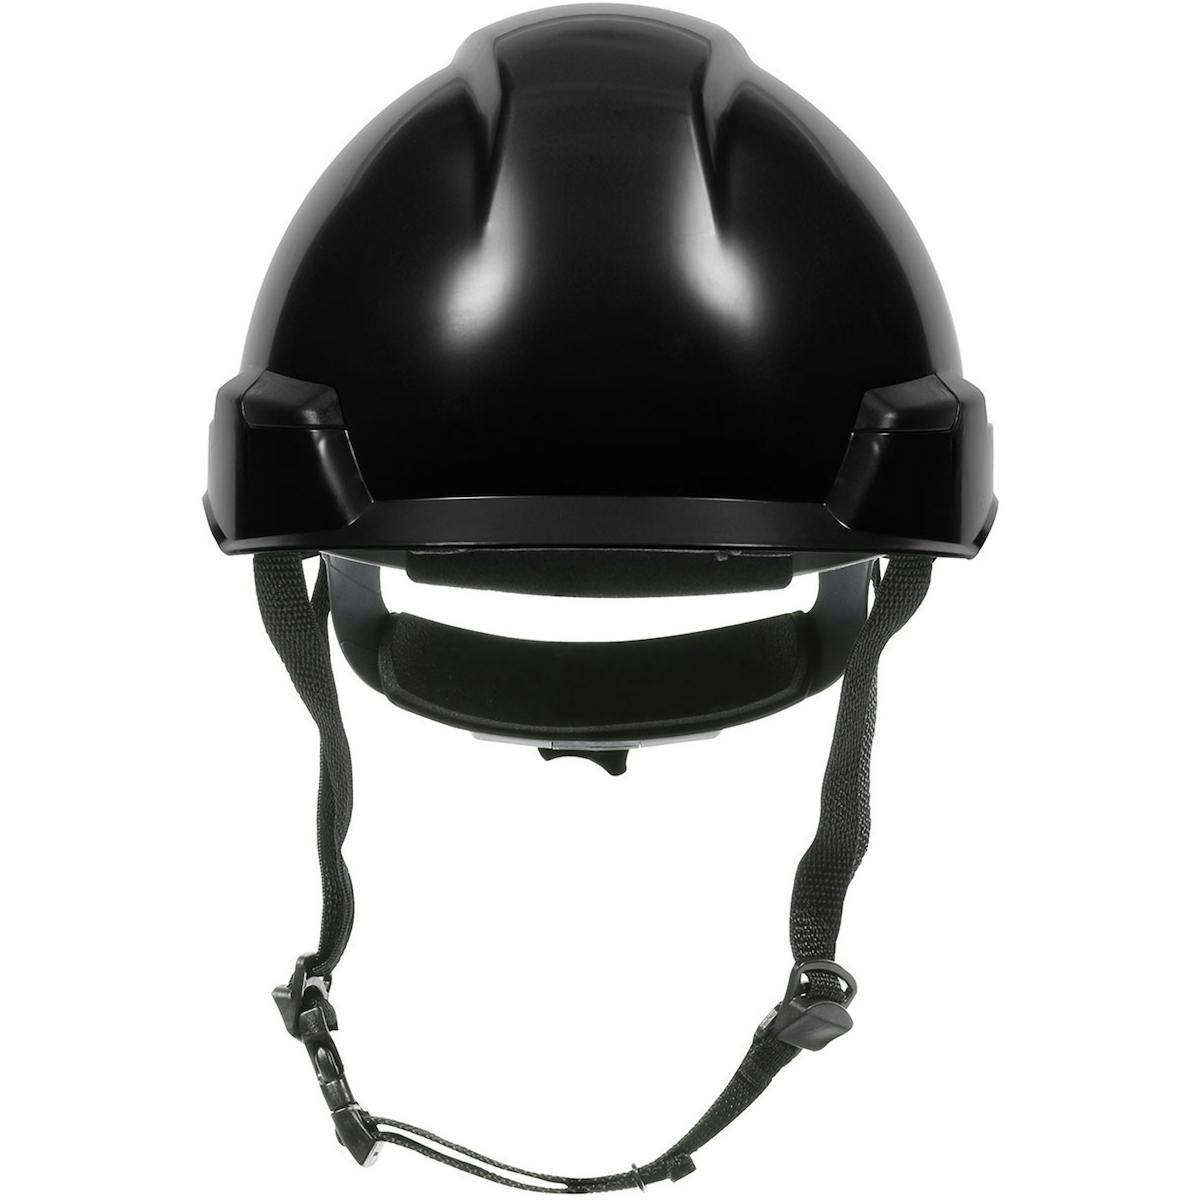 Rocky™ Industrial Climbing Helmet with Mips® Technology, Polycarbonate/ABS Shell, Hi-Density Foam Impact Liner, Nylon Suspension, Wheel Ratchet Adjustment and 4-Point Chin Strap (280-HP142RM)_1